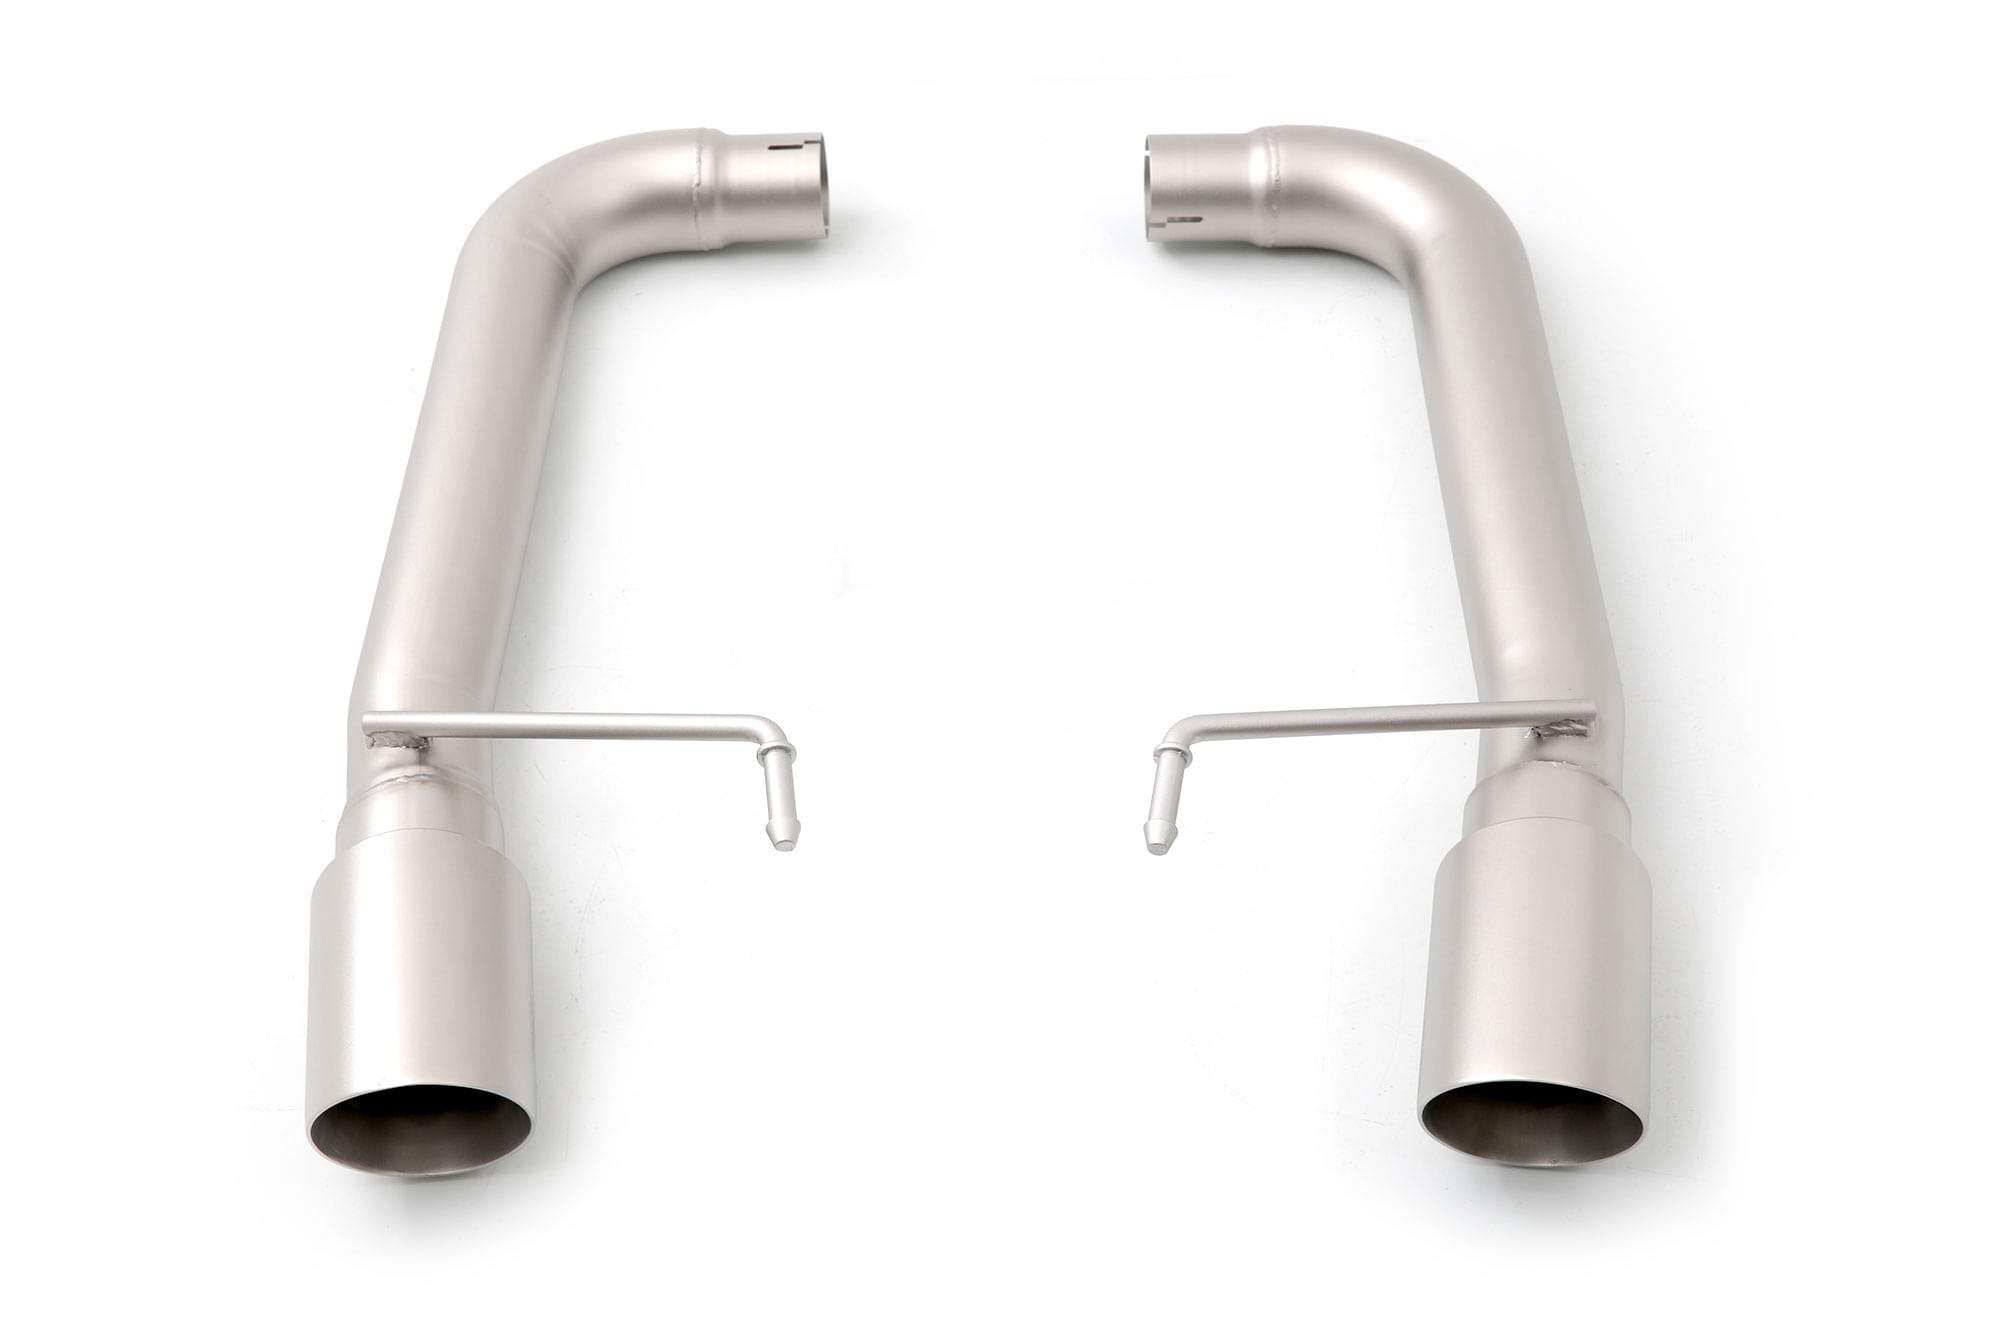 cp-e Austenite Ford Mustang EcoBoost Muffler Delete Axle Back Exhaust System